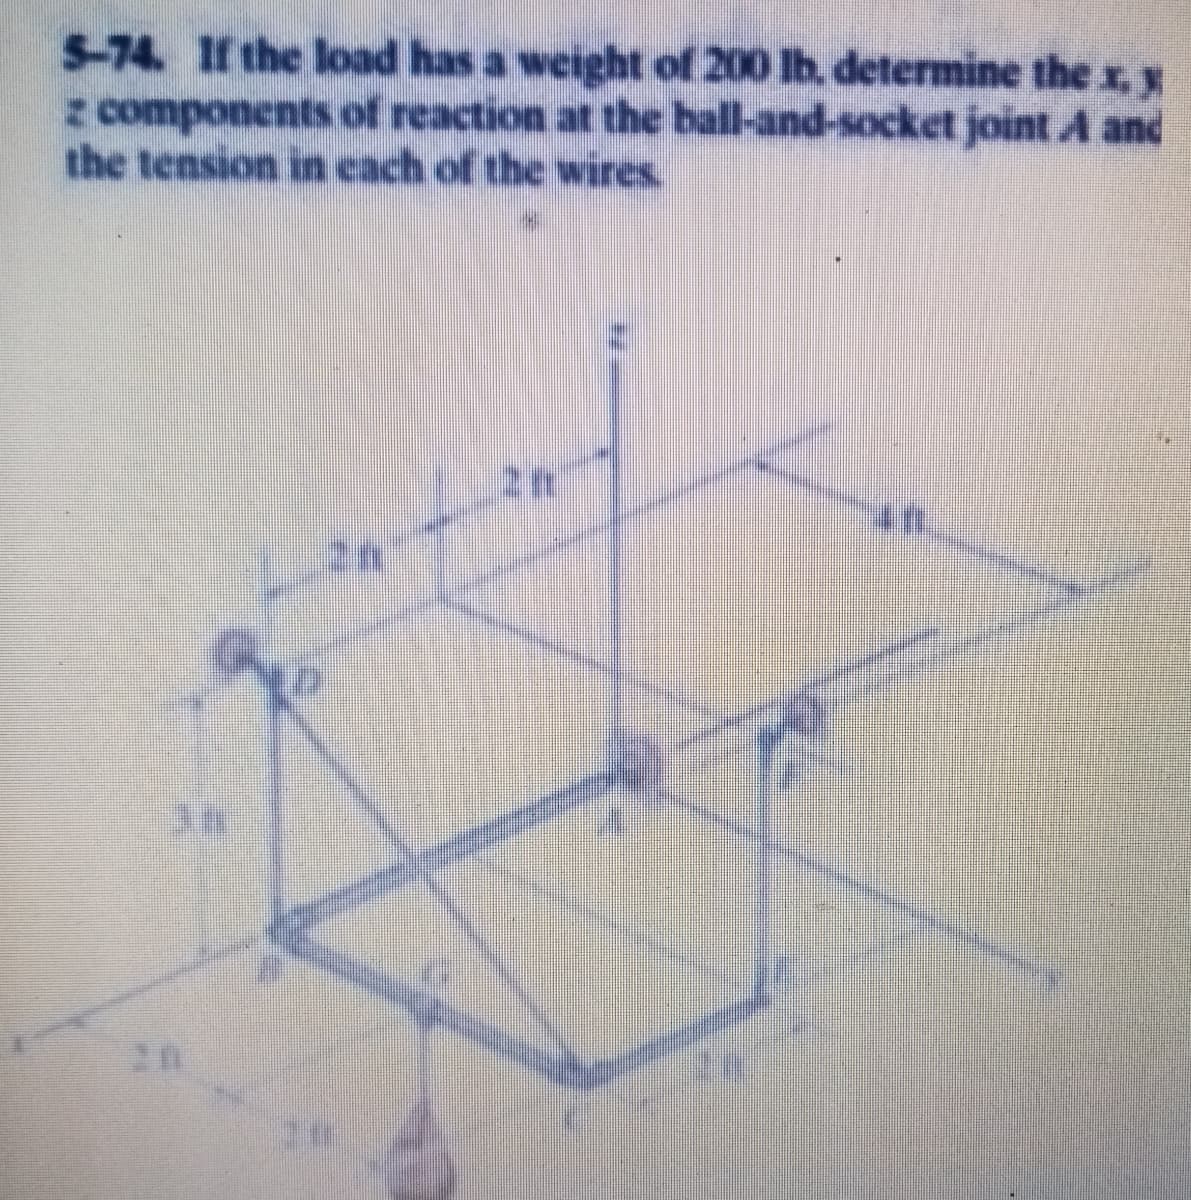 5-74. If the load has a weight of 200 lb, determine the x, y
z components of reaction at the ball-and-socket joint A and
the tension in cach of the wires.
20
